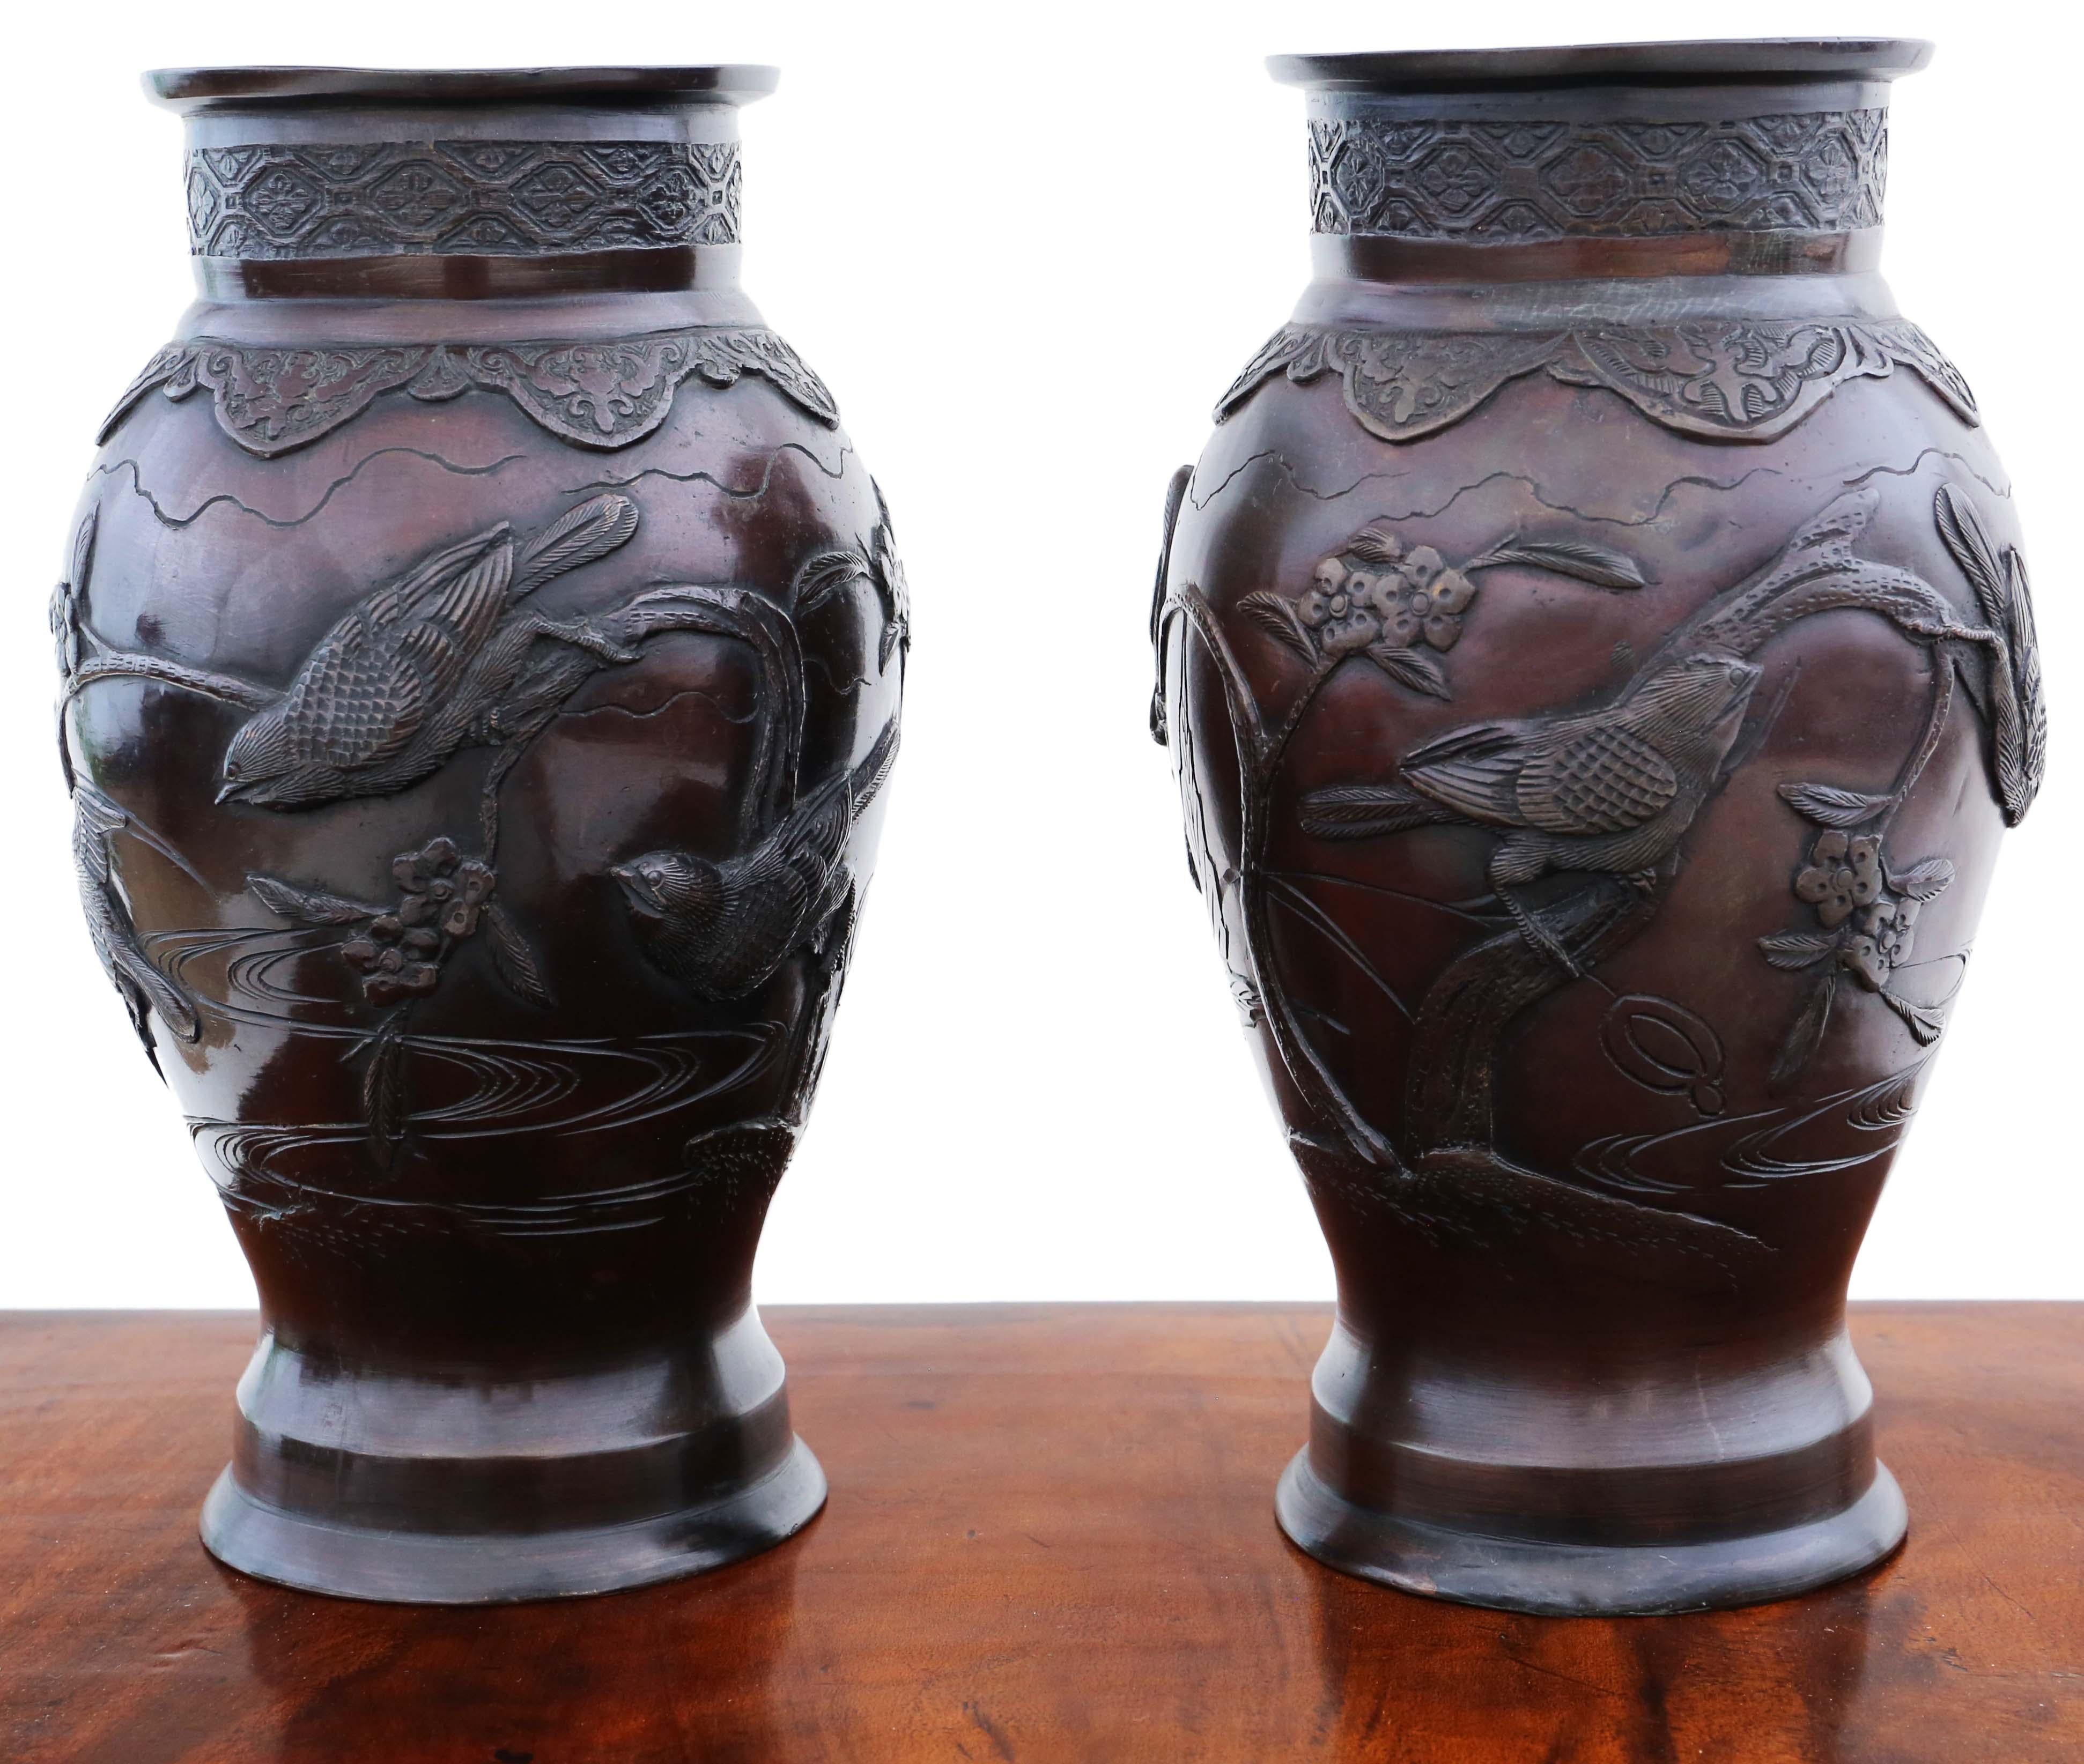 Antique large pair of fine quality Japanese bronze vases 19th Century Meiji Period. Artist pieces with signature on the bases. 

Would look amazing in the right location. Attractive design with birds and plants.

Overall maximum dimensions: 26cmH x